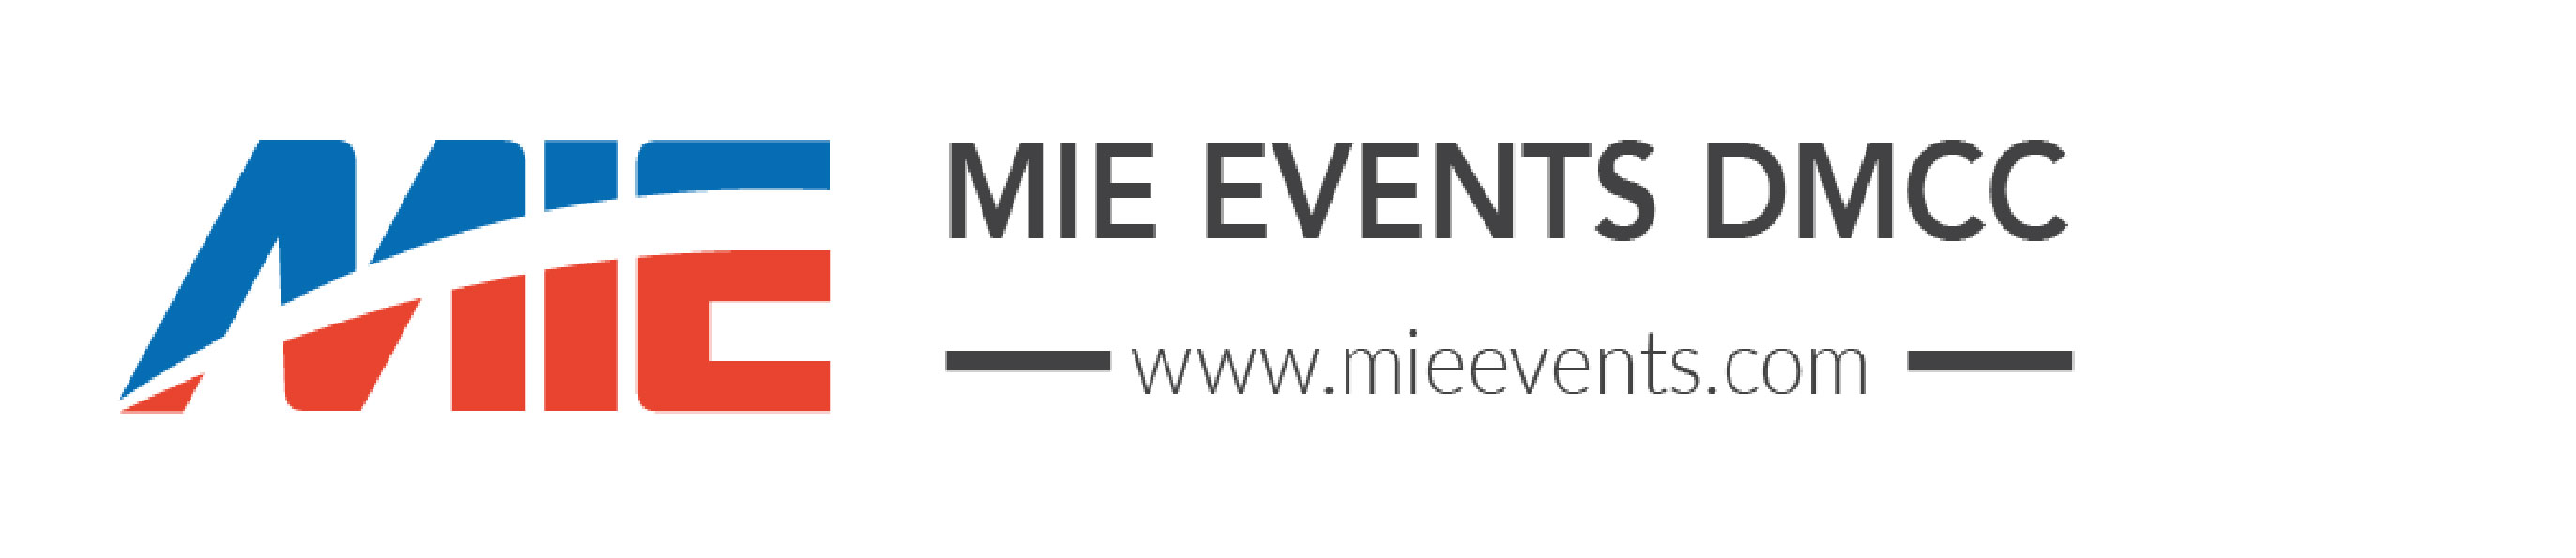 MIE Events Dmcc